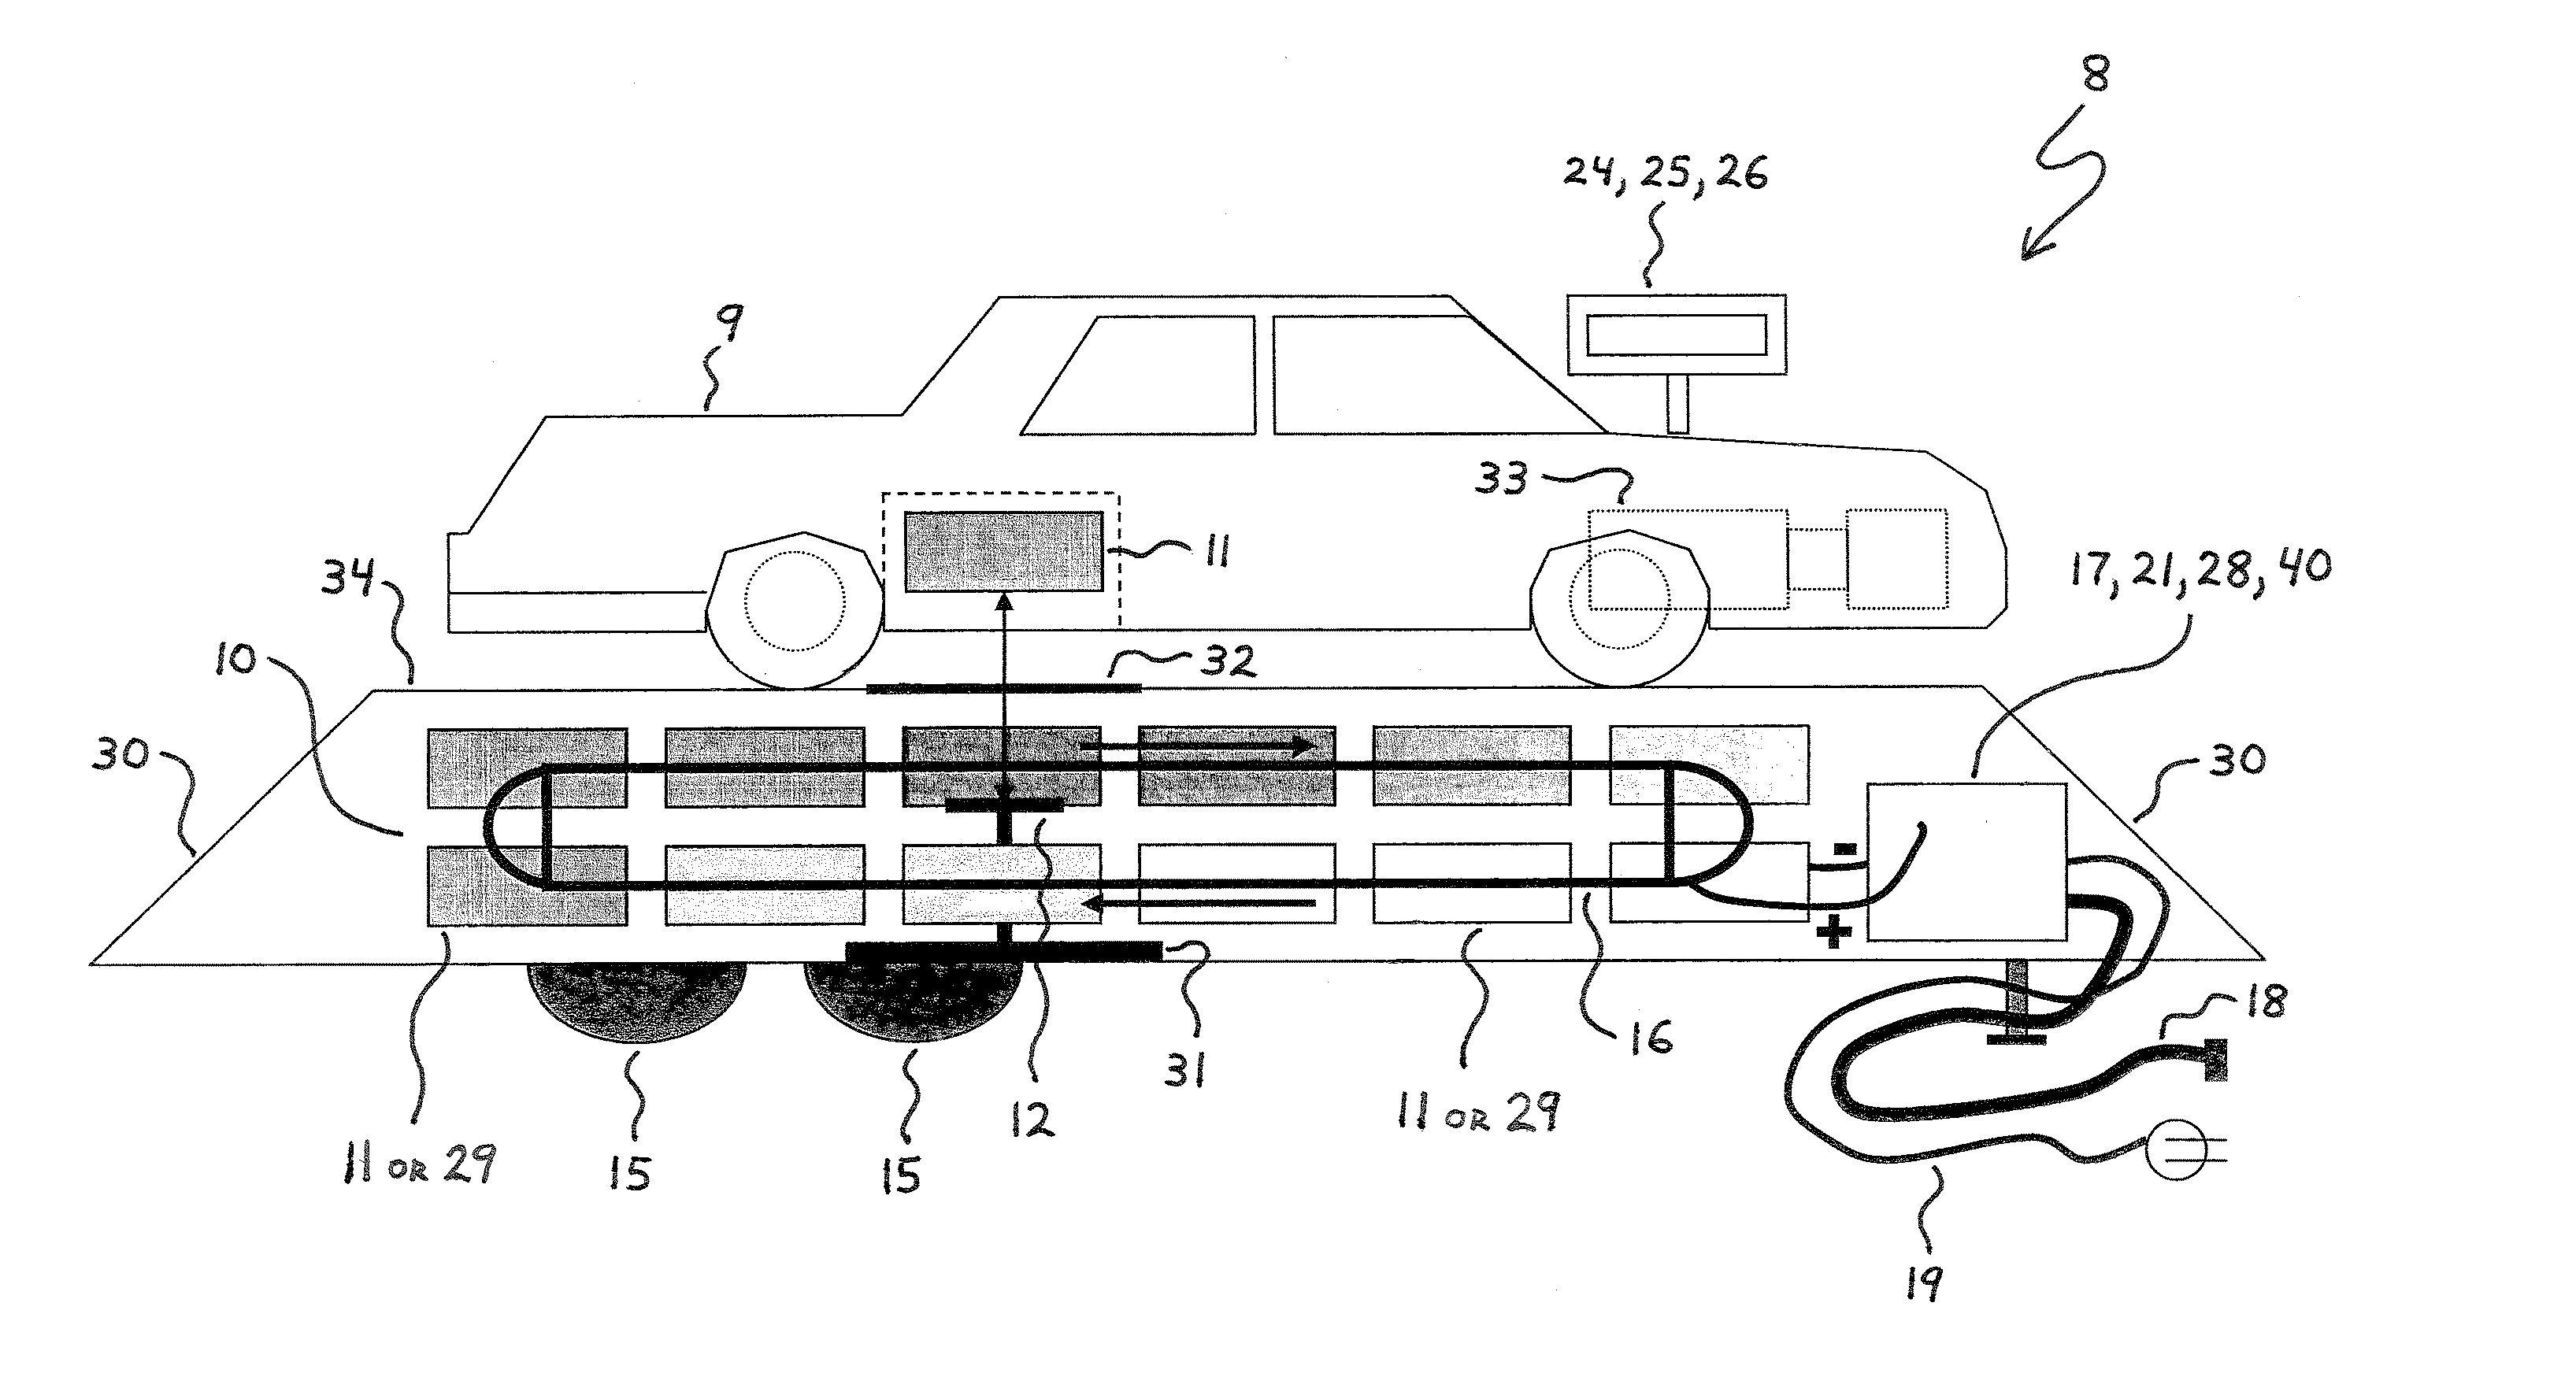 System for replenishing energy sources onboard different types of automotive vehicles